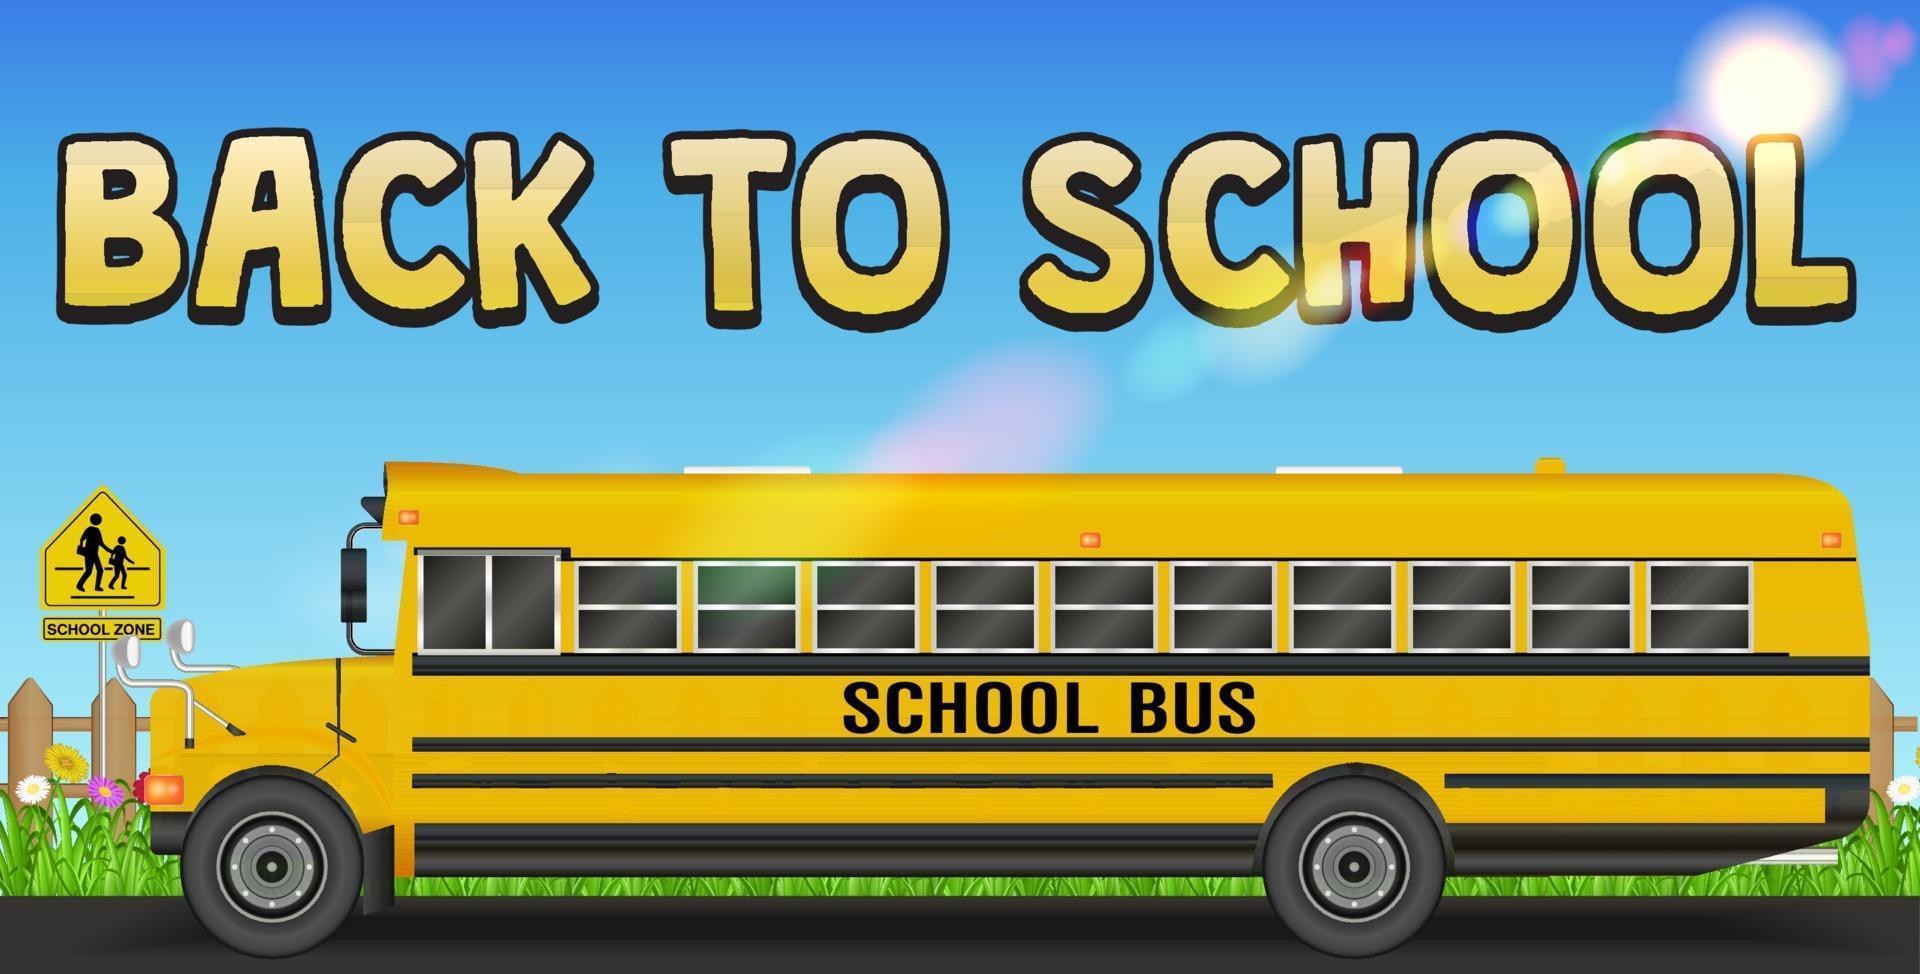 back to school with school bus on the road vector